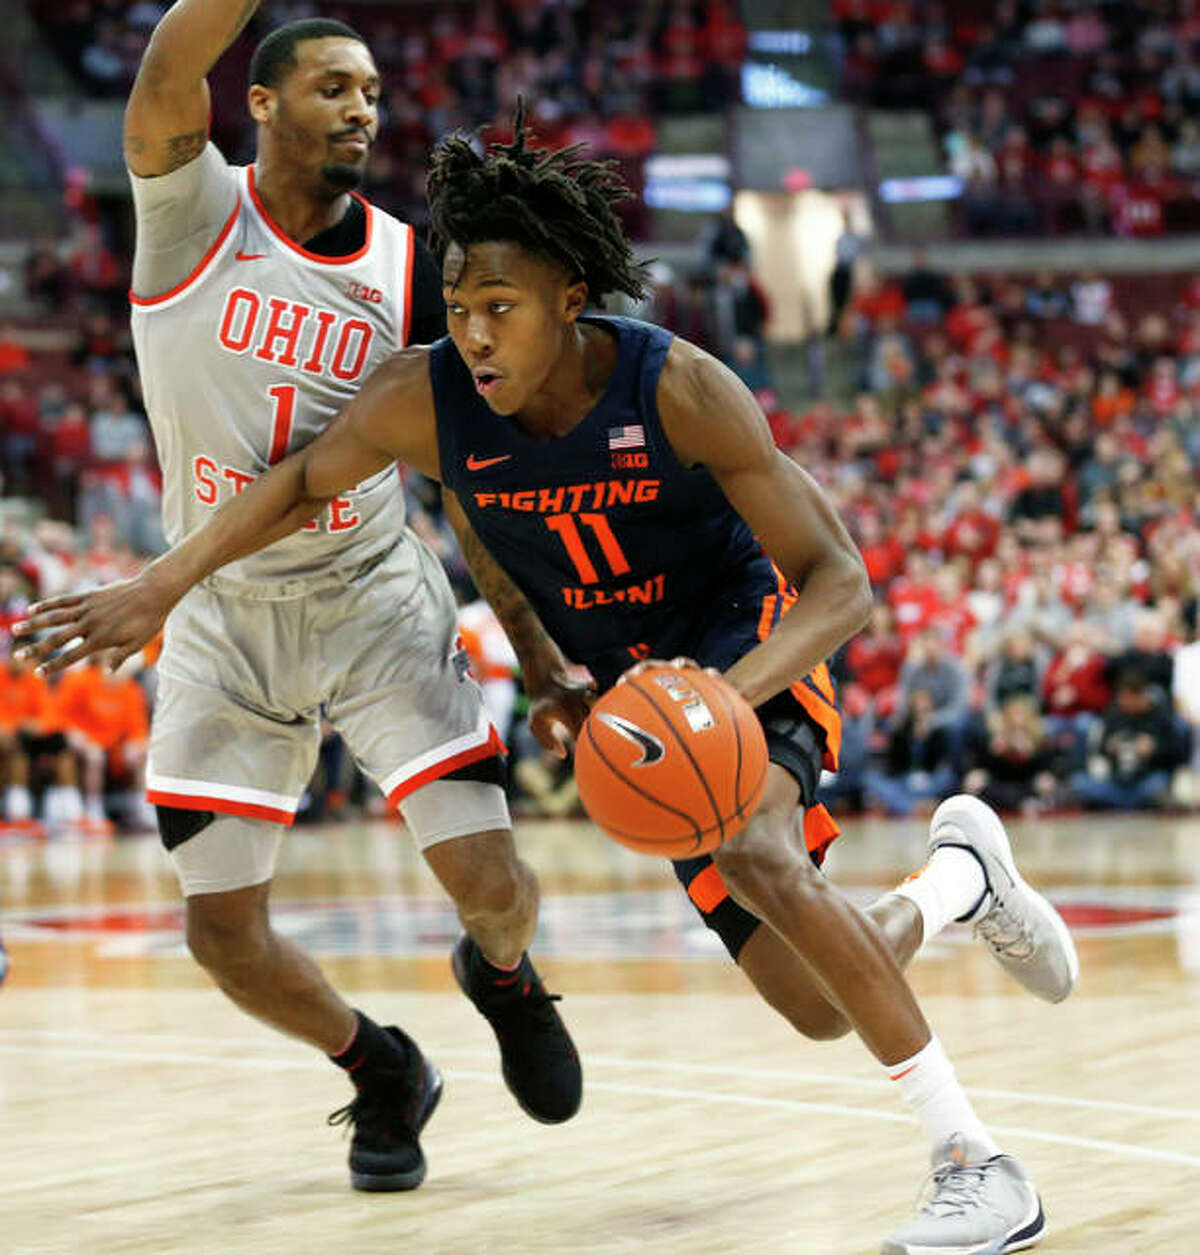 Illinois’ Ayo Dosunmu (right) drives against Ohio State’s Luther Muhammad March 5 in Columbus, Ohio. Dosunmu has announced that he is withdrawing from the NBA Draft and will return to the Illini next season.